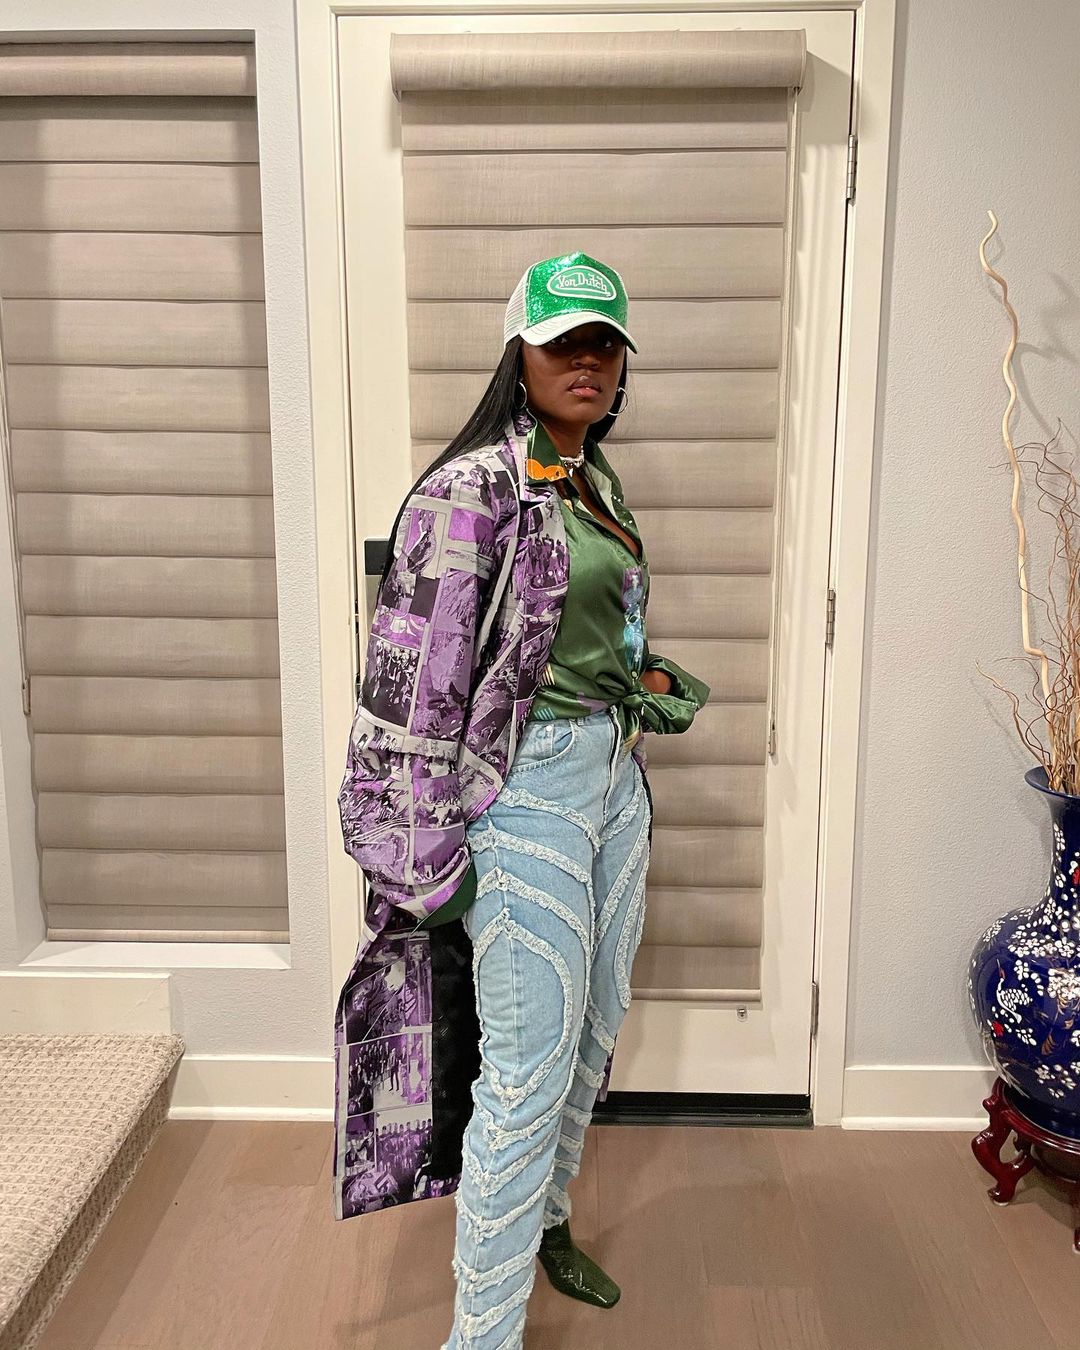 Amaarae in jeans, green shirt, green shoes and a purple coat featured as a fashionable African female artiste